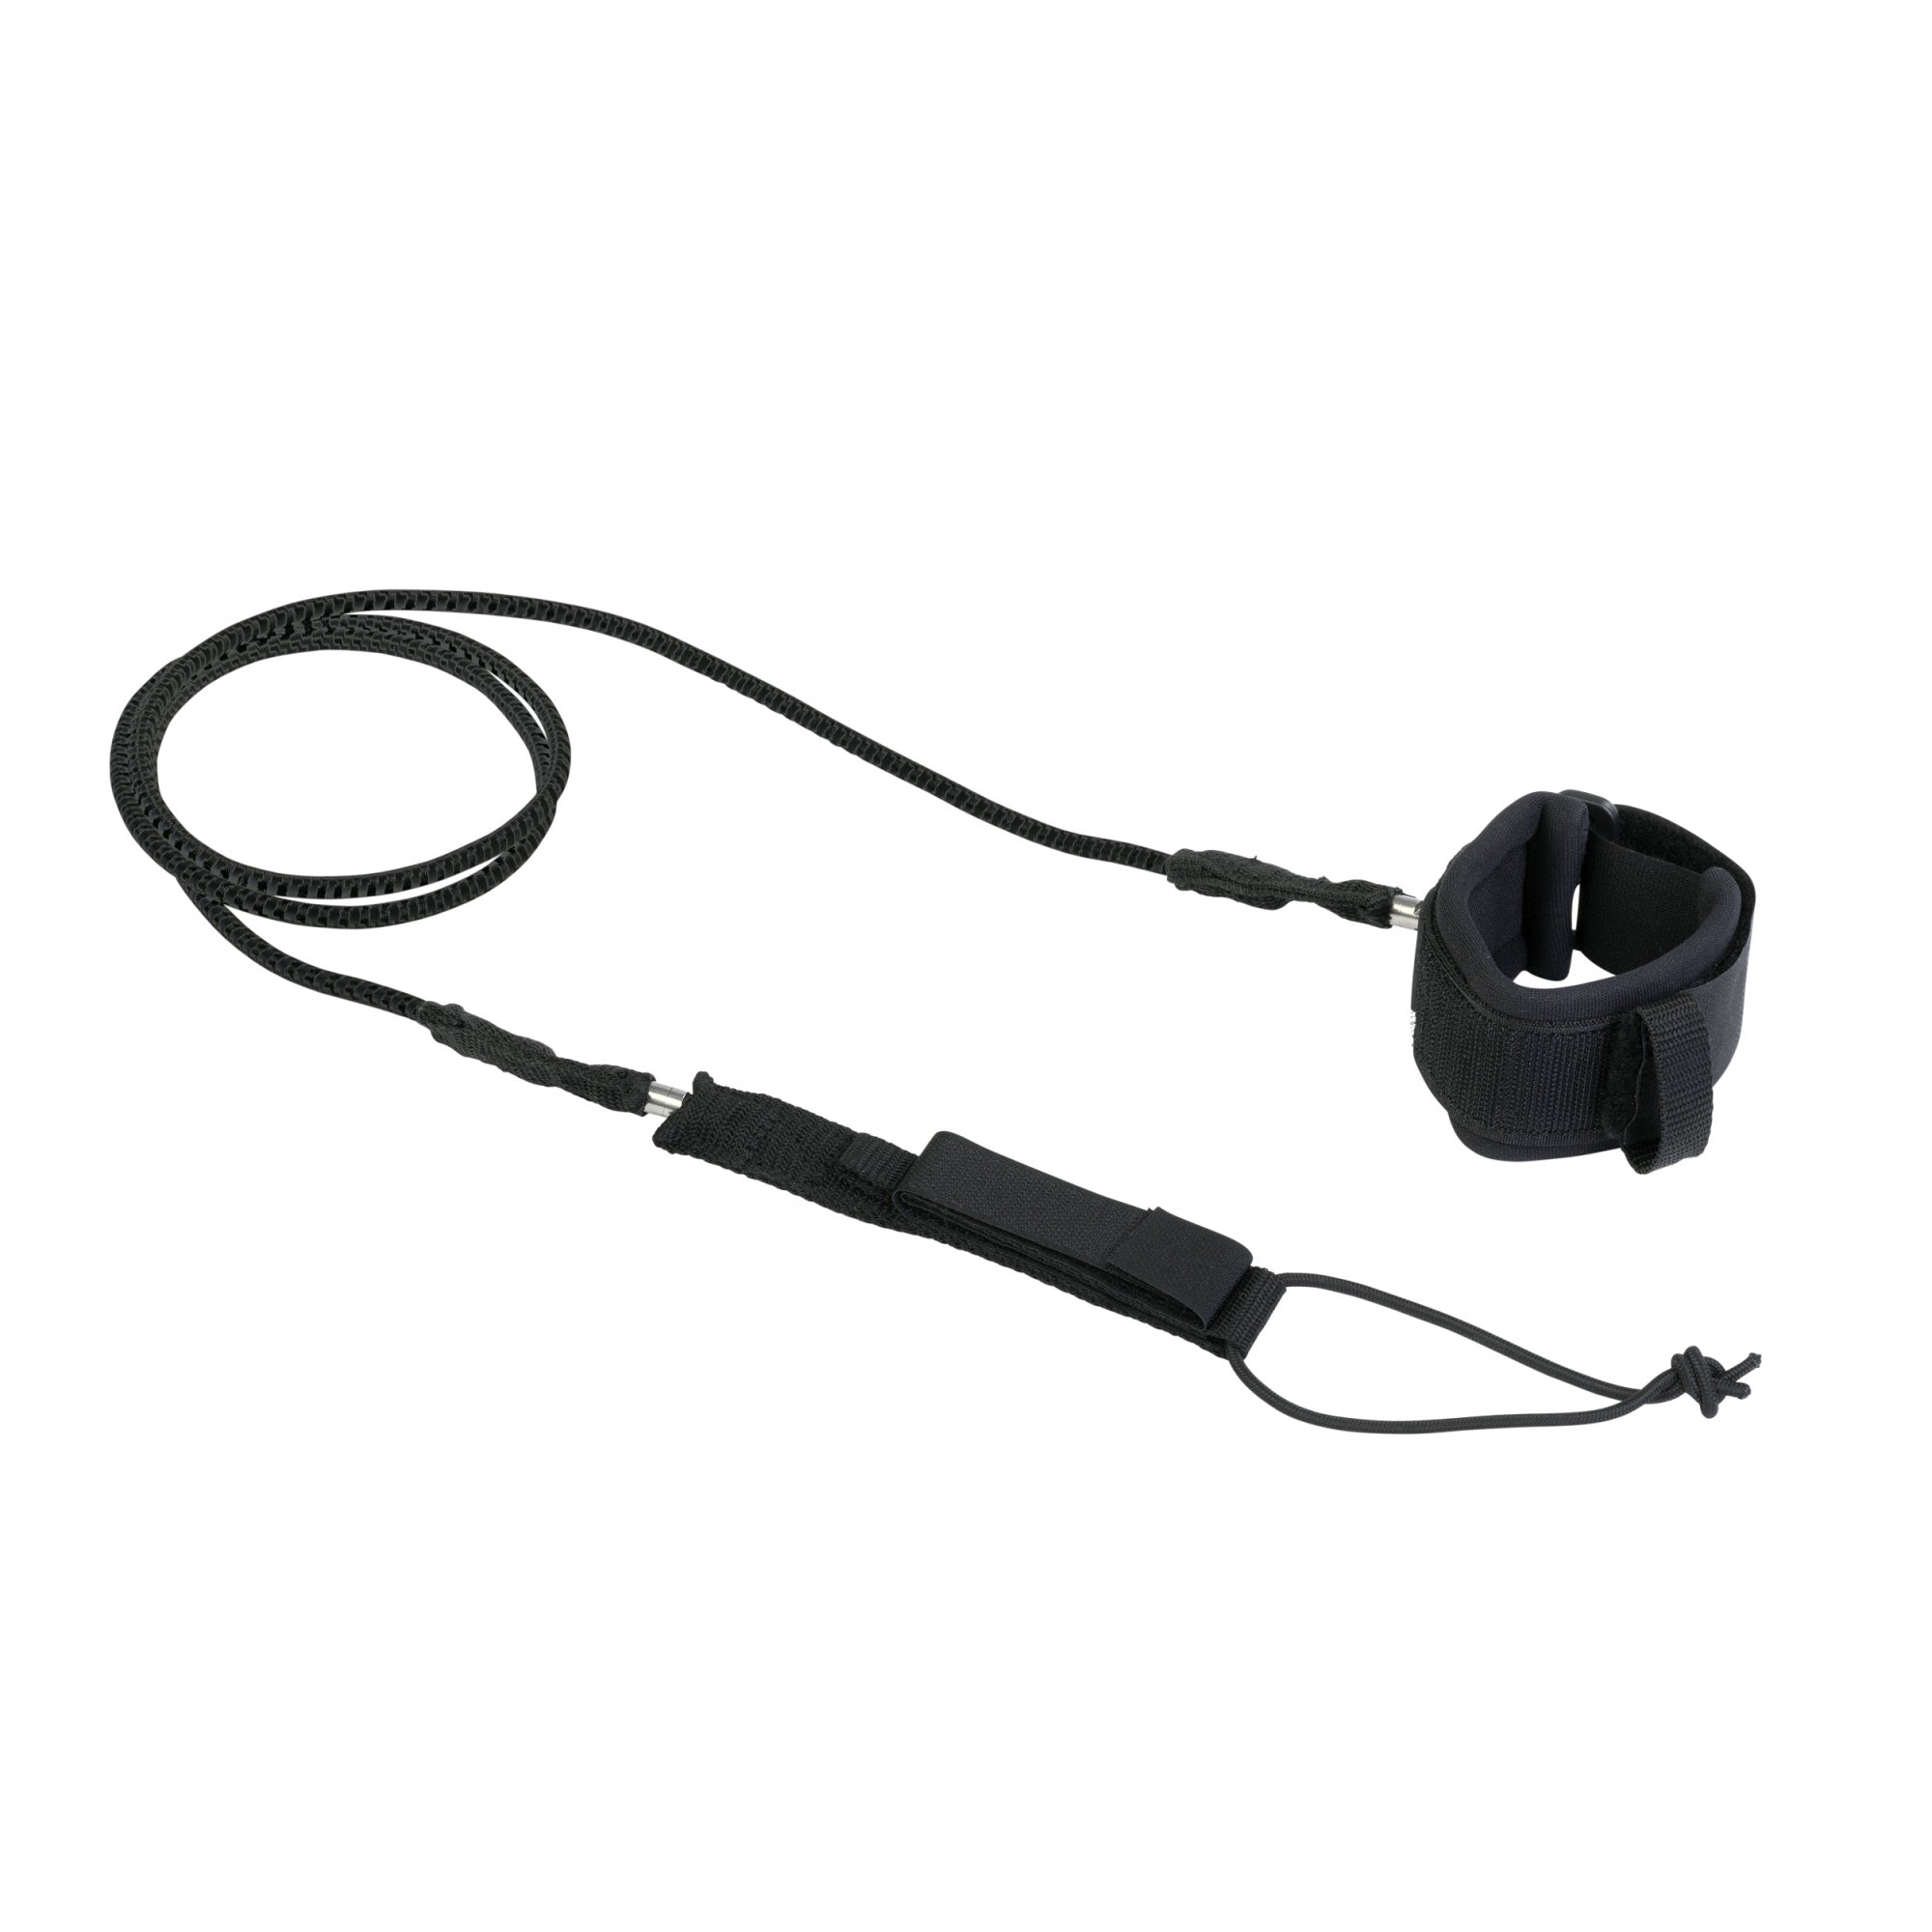 ION Wing Core Wrist Leash 2023 - Worthing Watersports - 9010583143880 - Accessories - ION Water